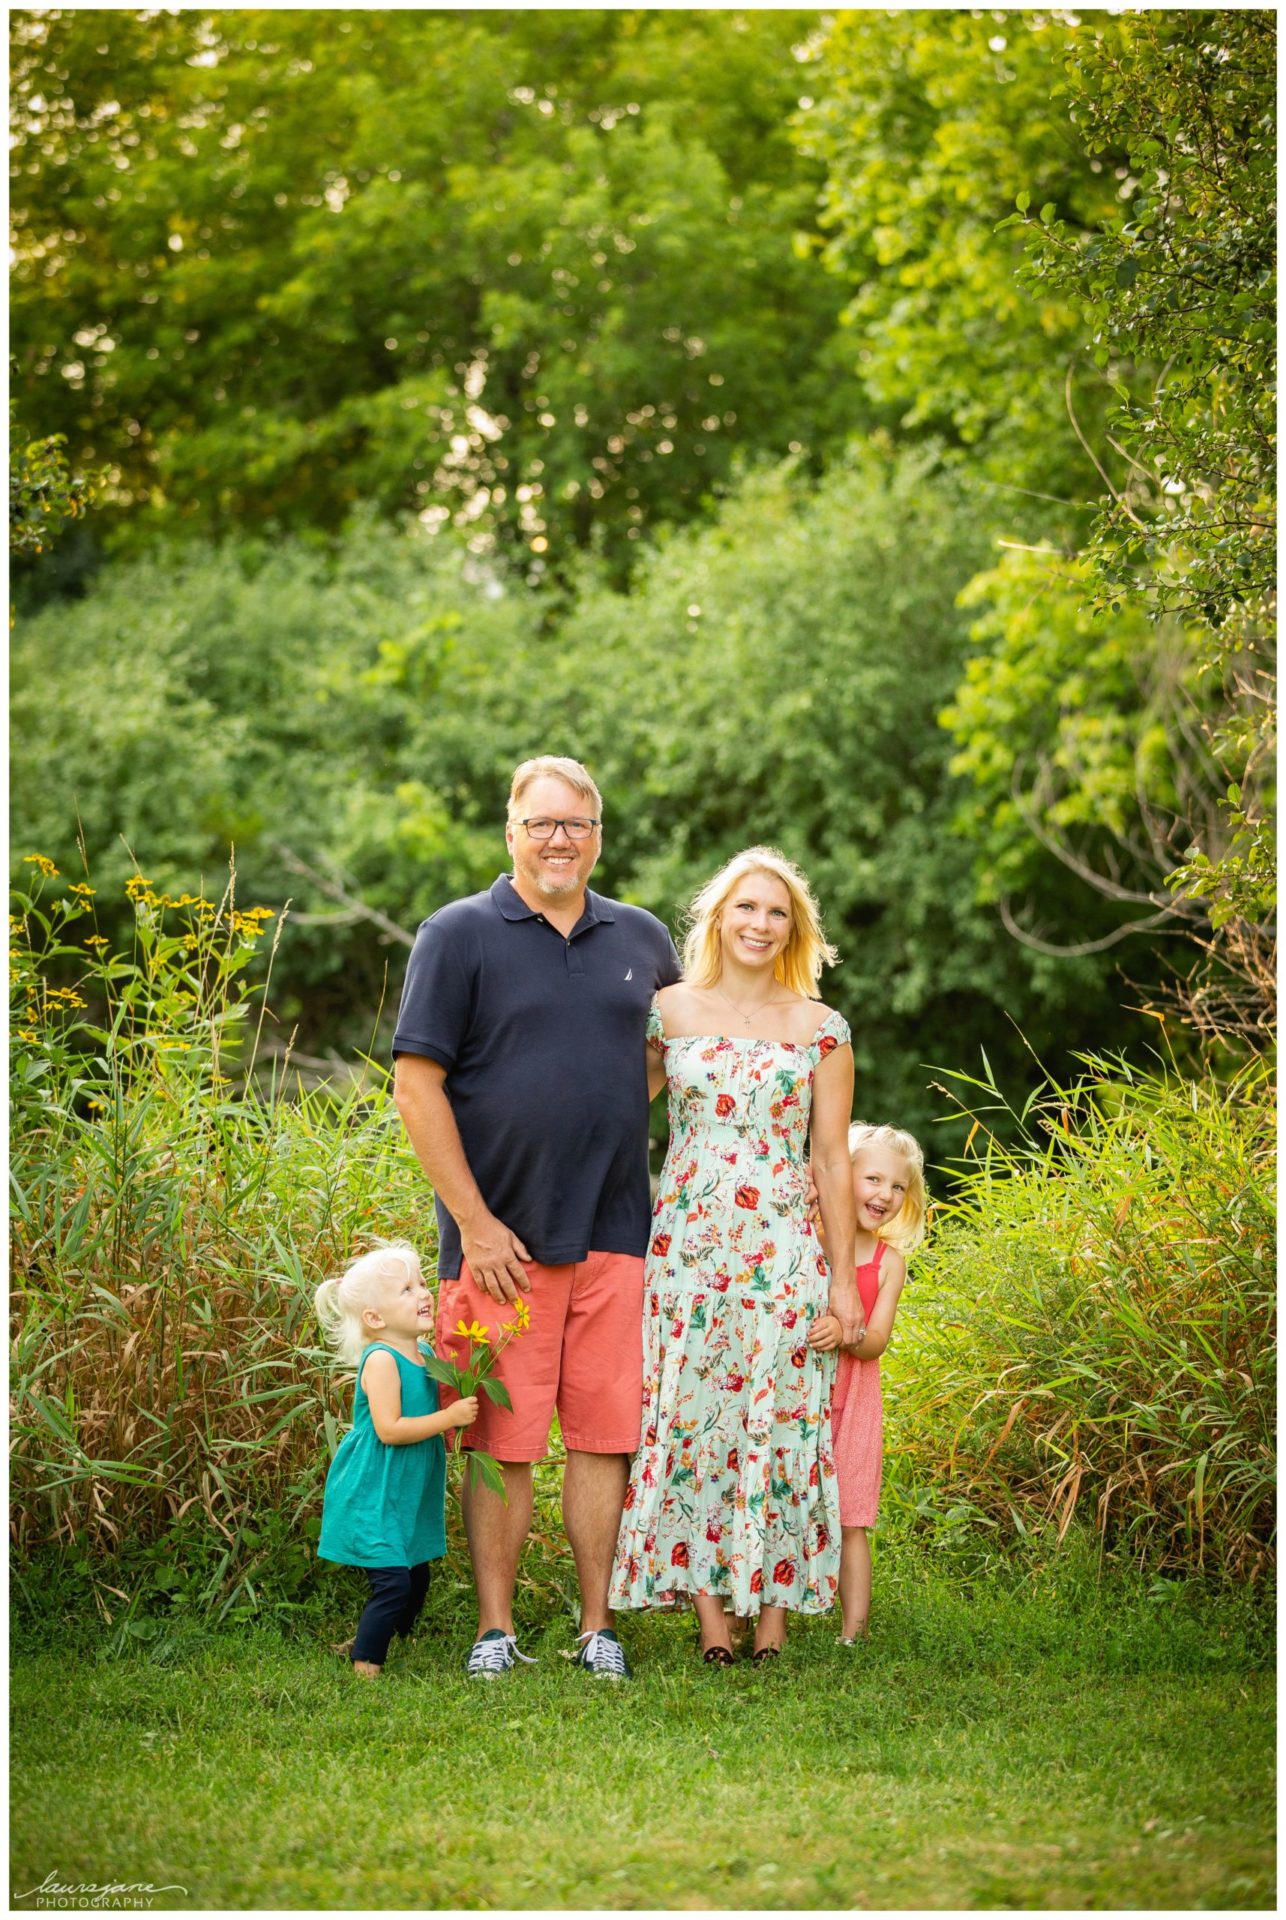 Timeless family portraits at Fox River Sanctuary